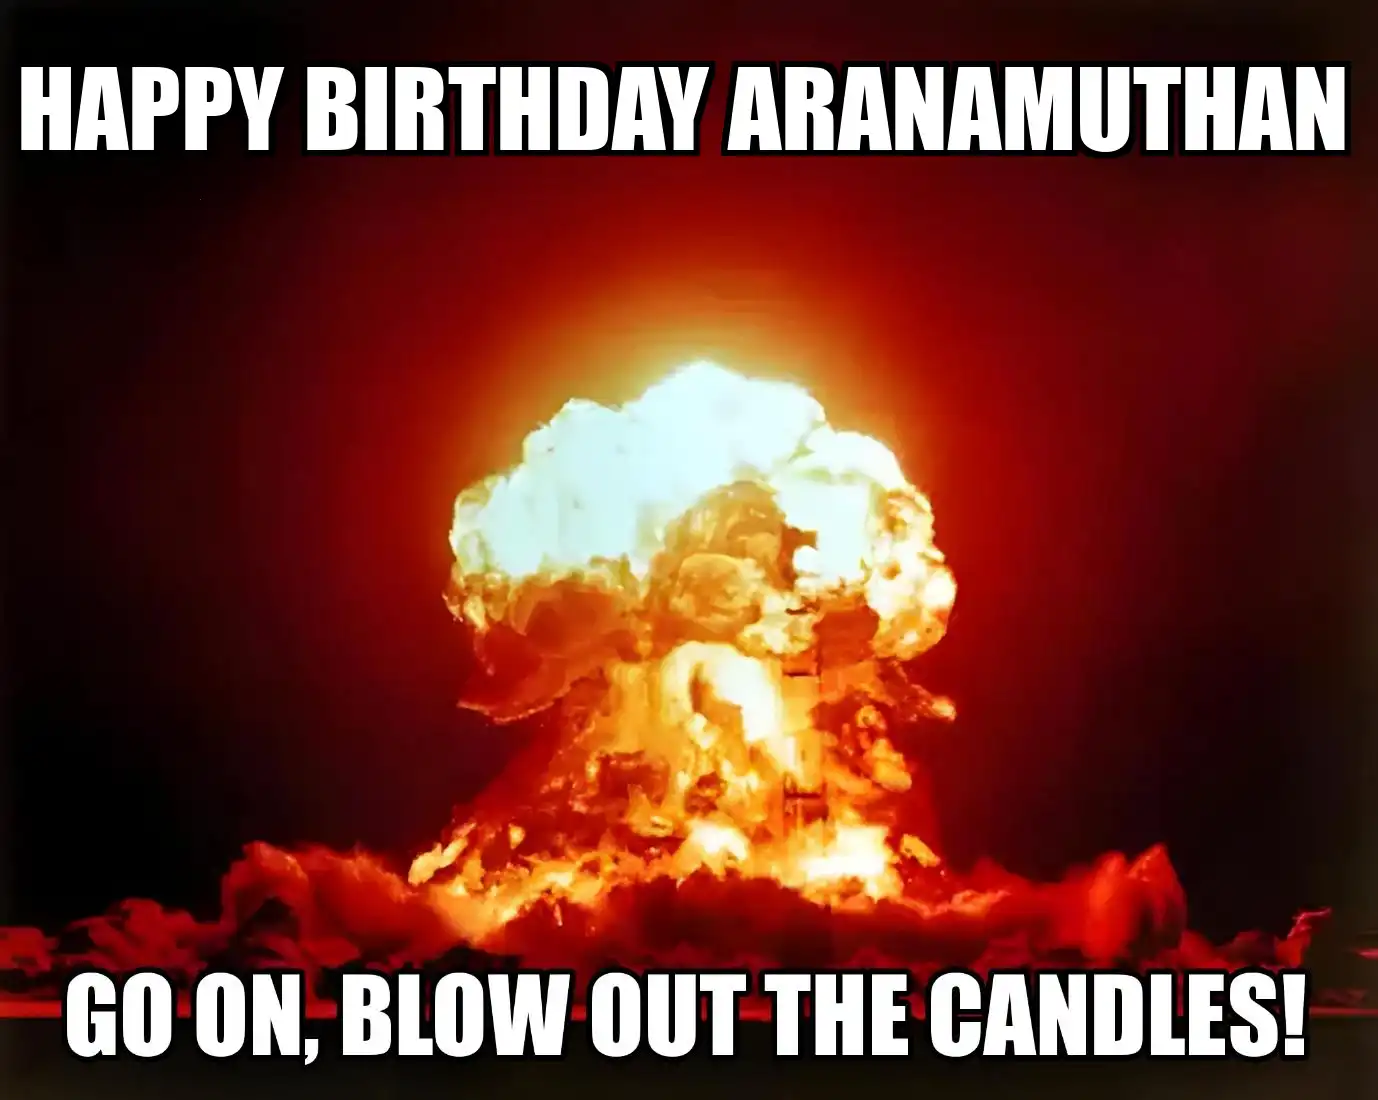 Happy Birthday Aranamuthan Go On Blow Out The Candles Meme